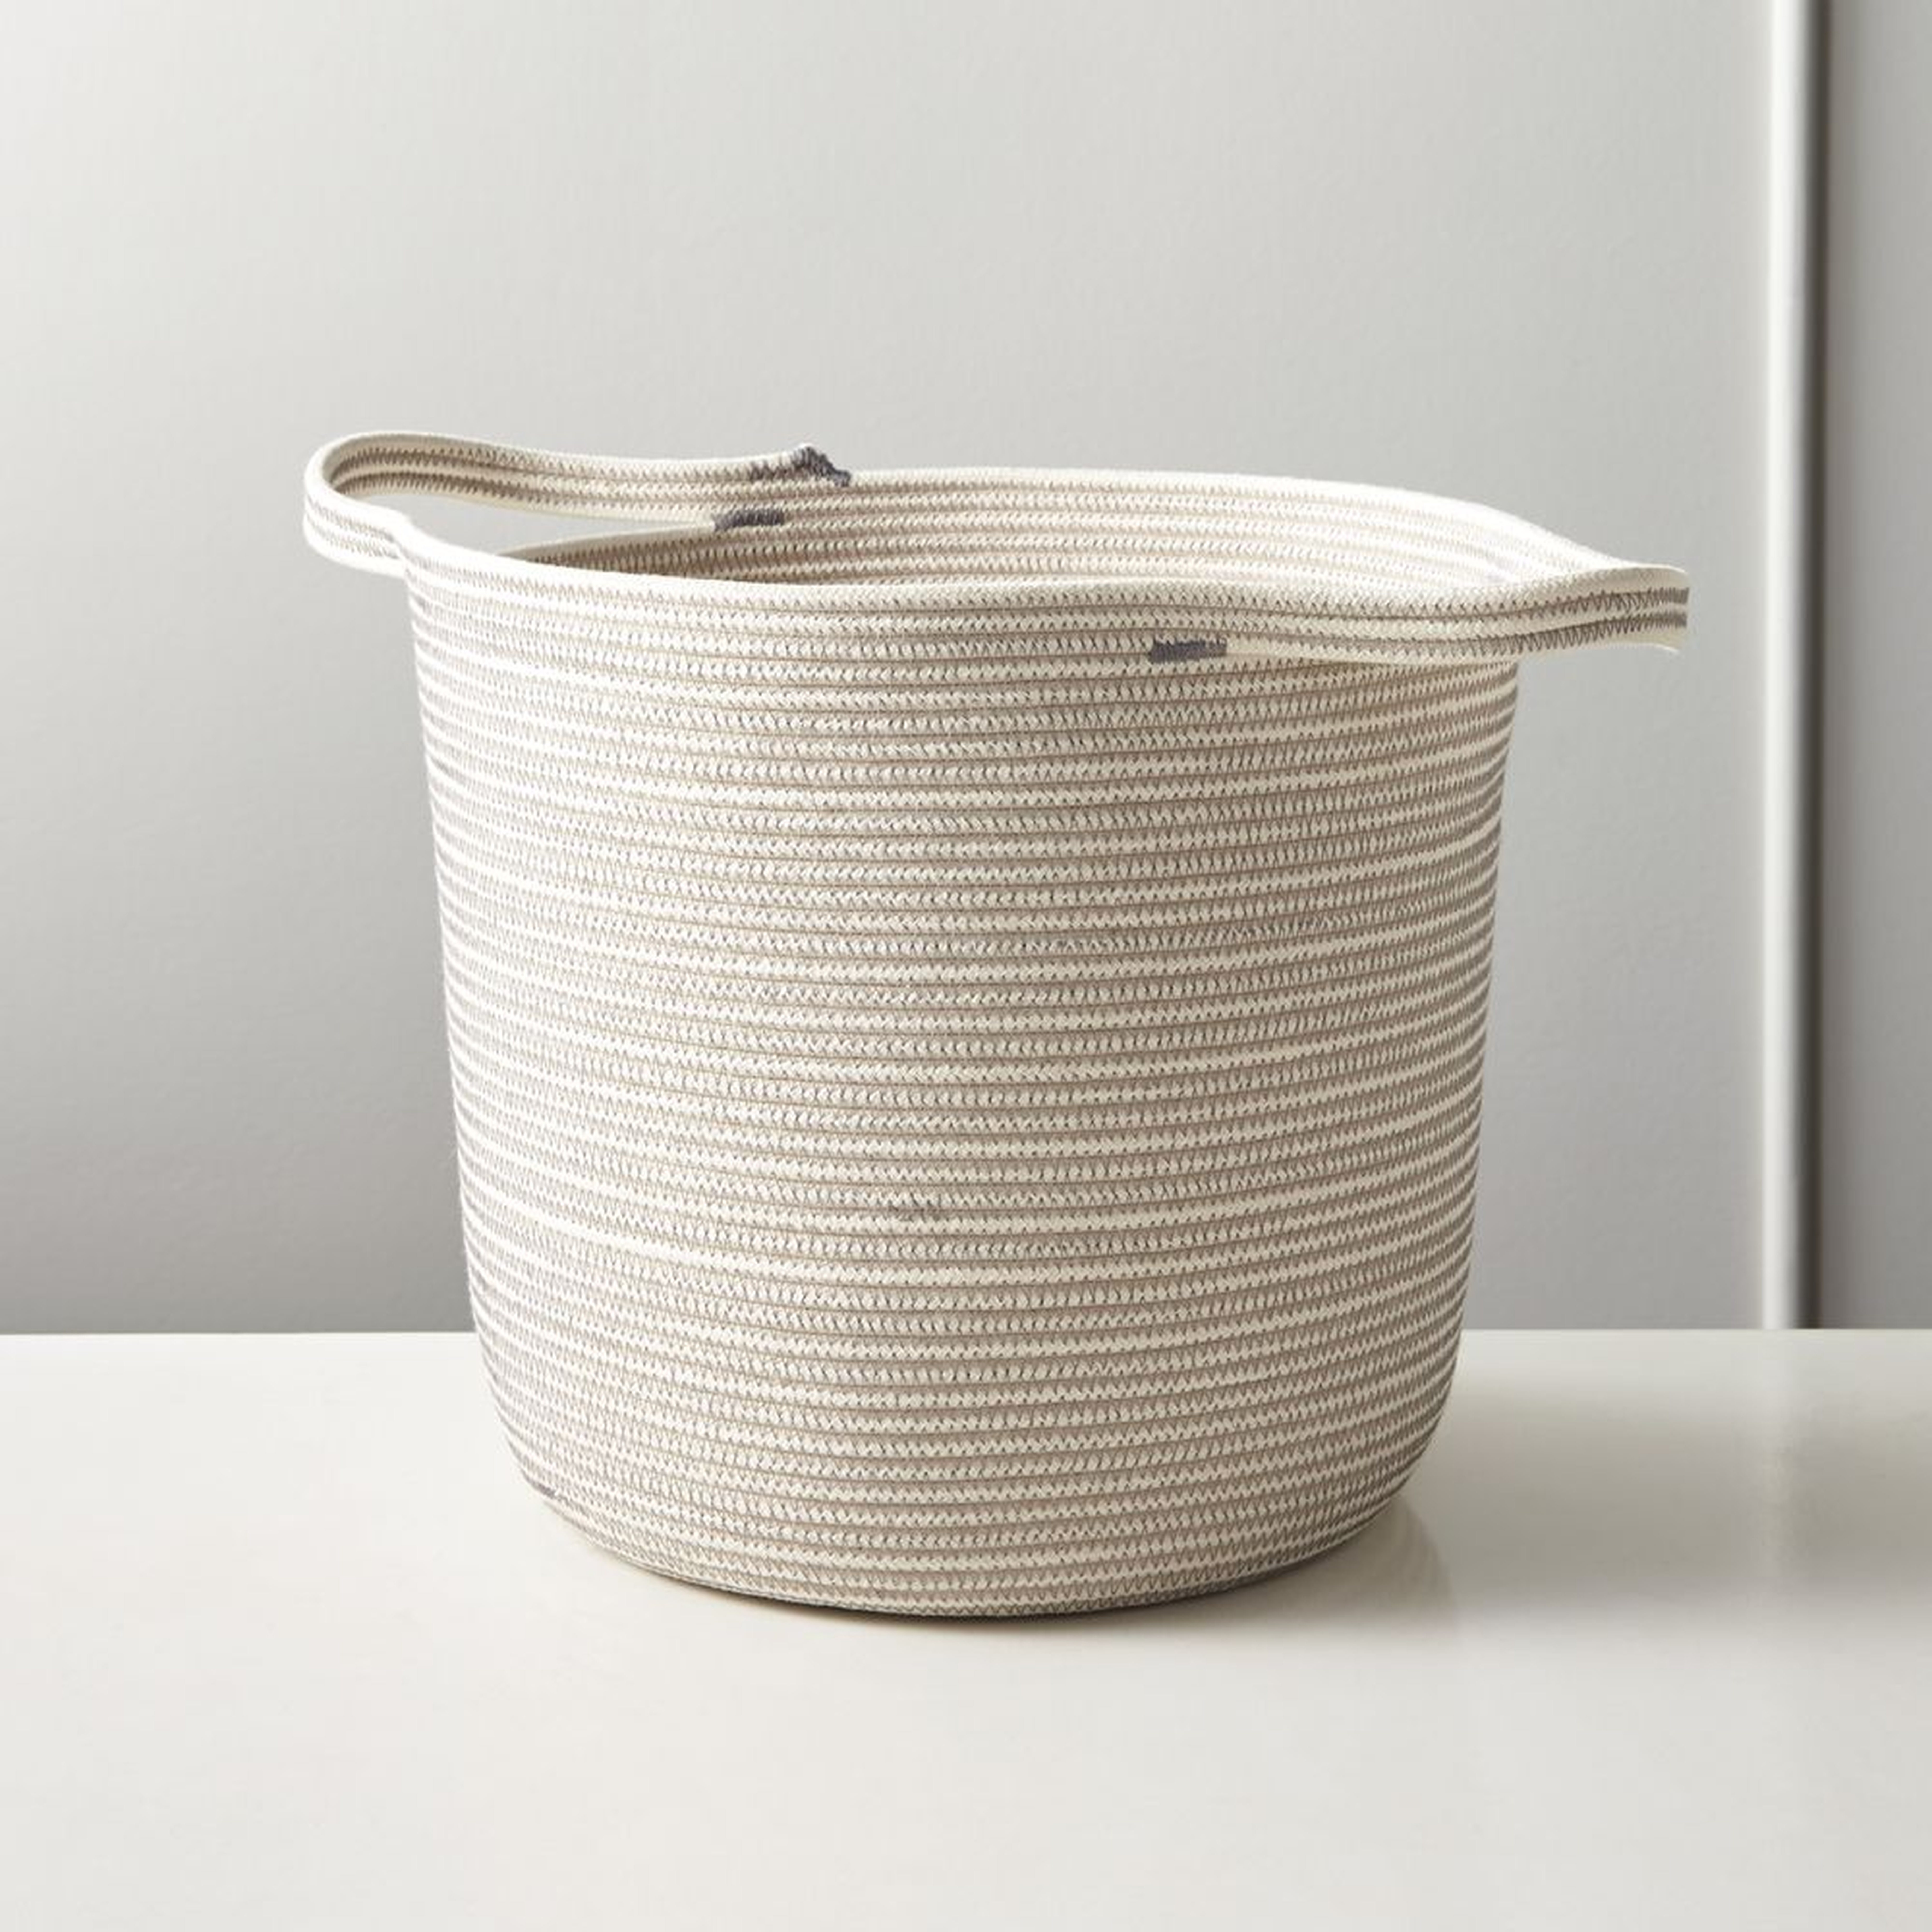 Dumbo Carrier Grey and White Basket - CB2